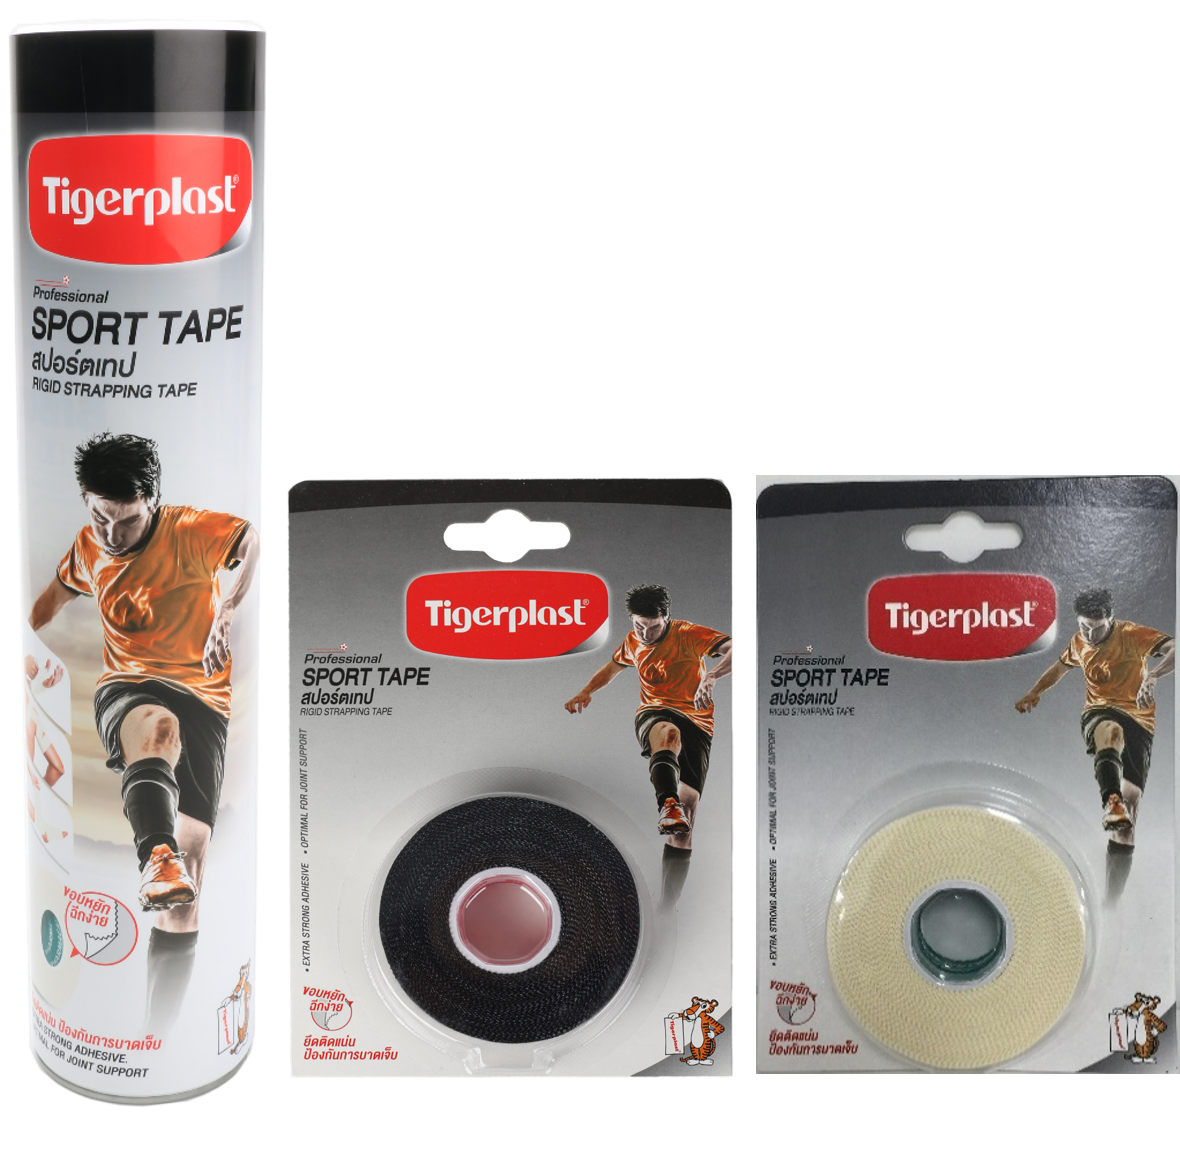 SPORT TAPE  Rigid Strapping Tape